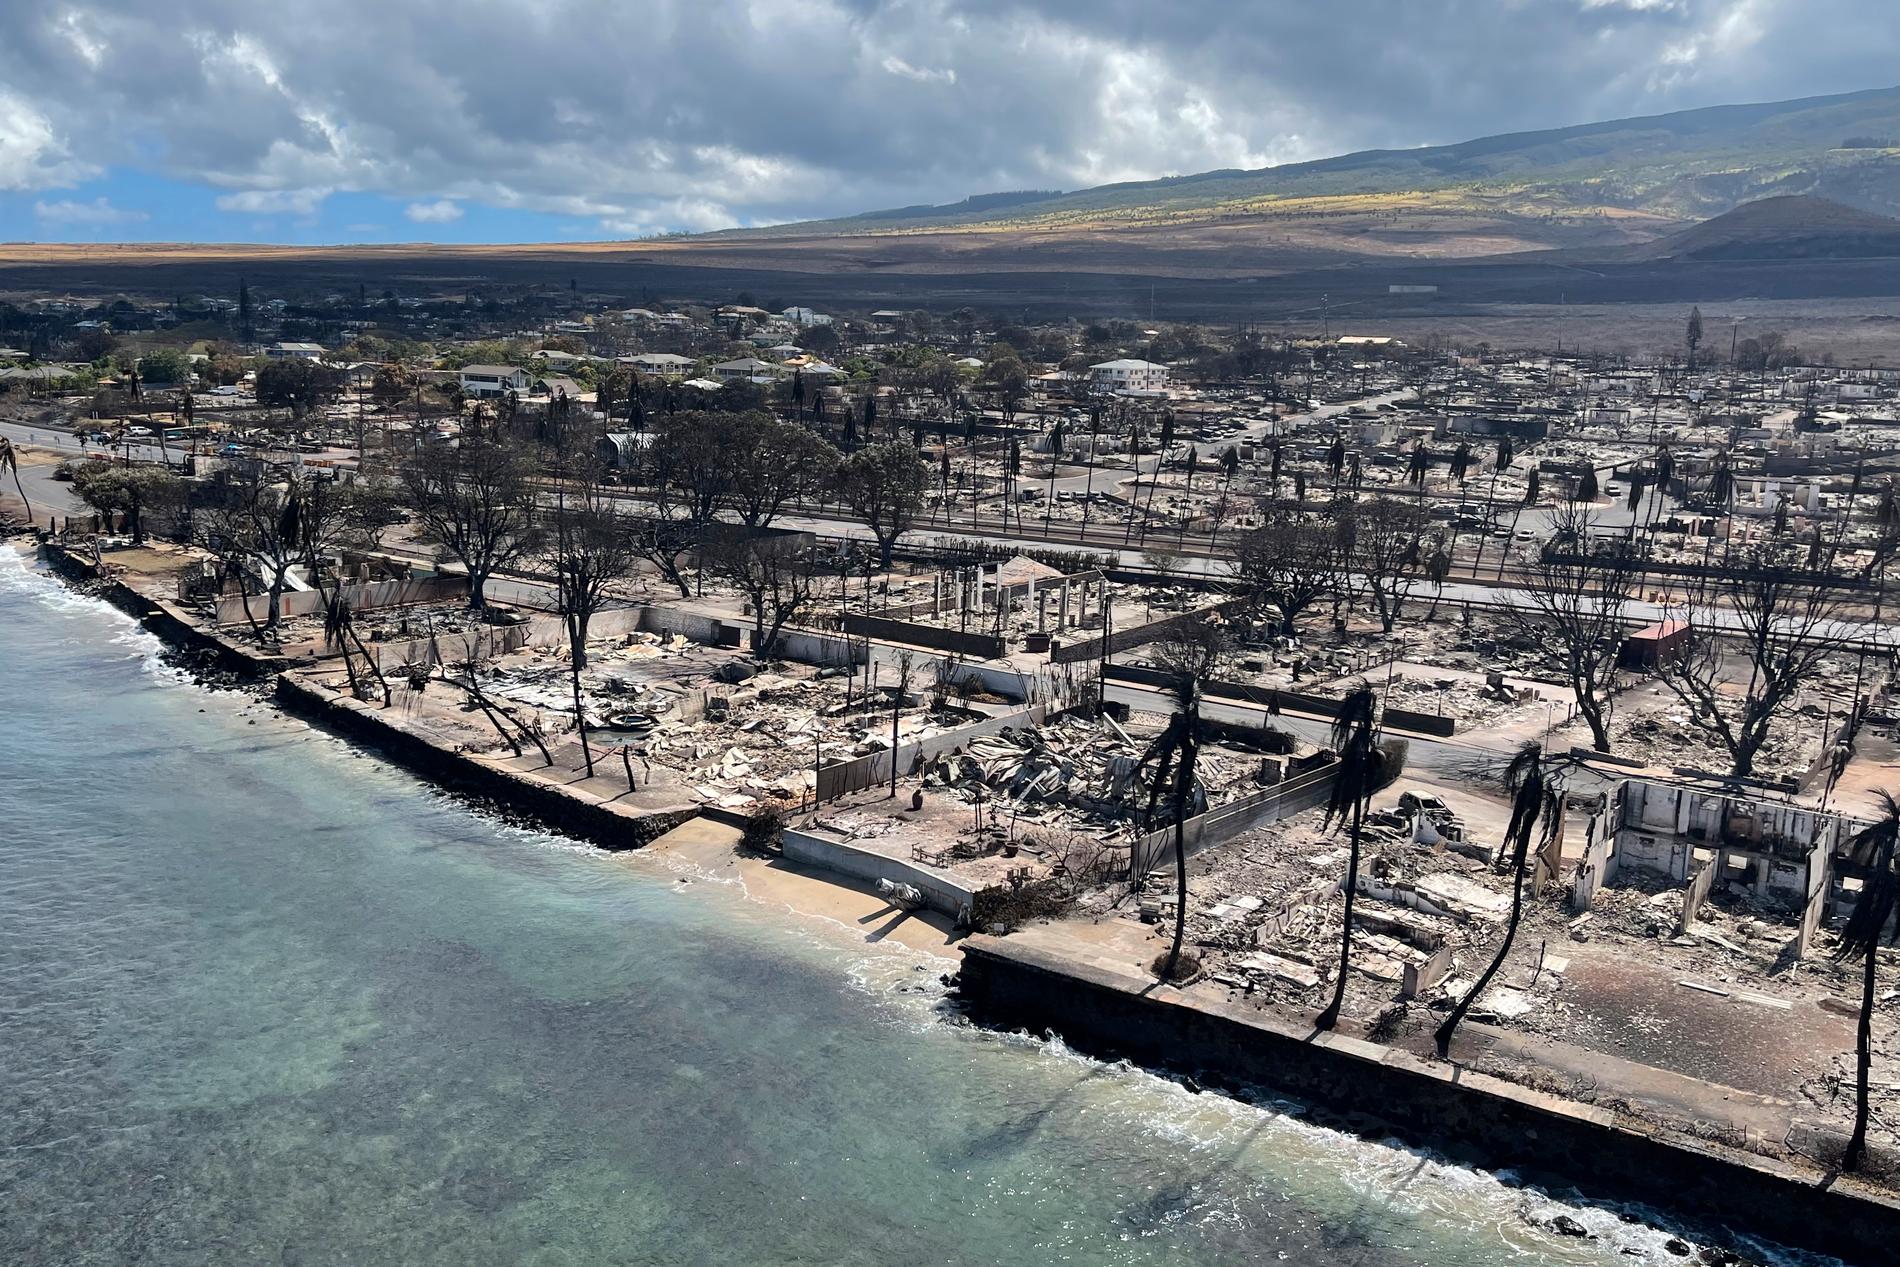 Anger grows after a wildfire in Hawaii – an emergency notification fails